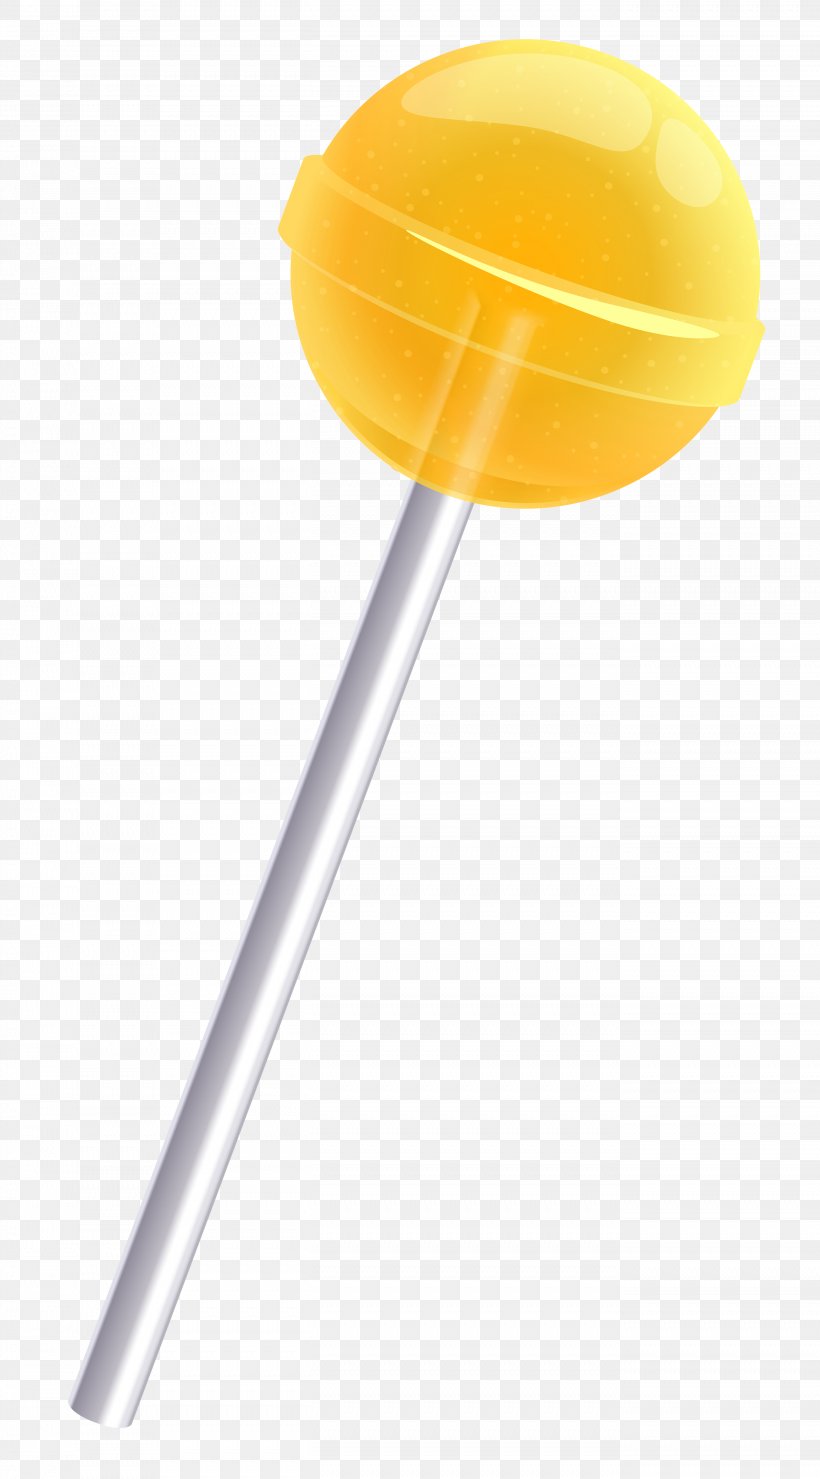 Download Spoon Yellow Design Product Png 2706x4882px Cutlery Lollipop Product Design Spoon Yellow Download Free Yellowimages Mockups